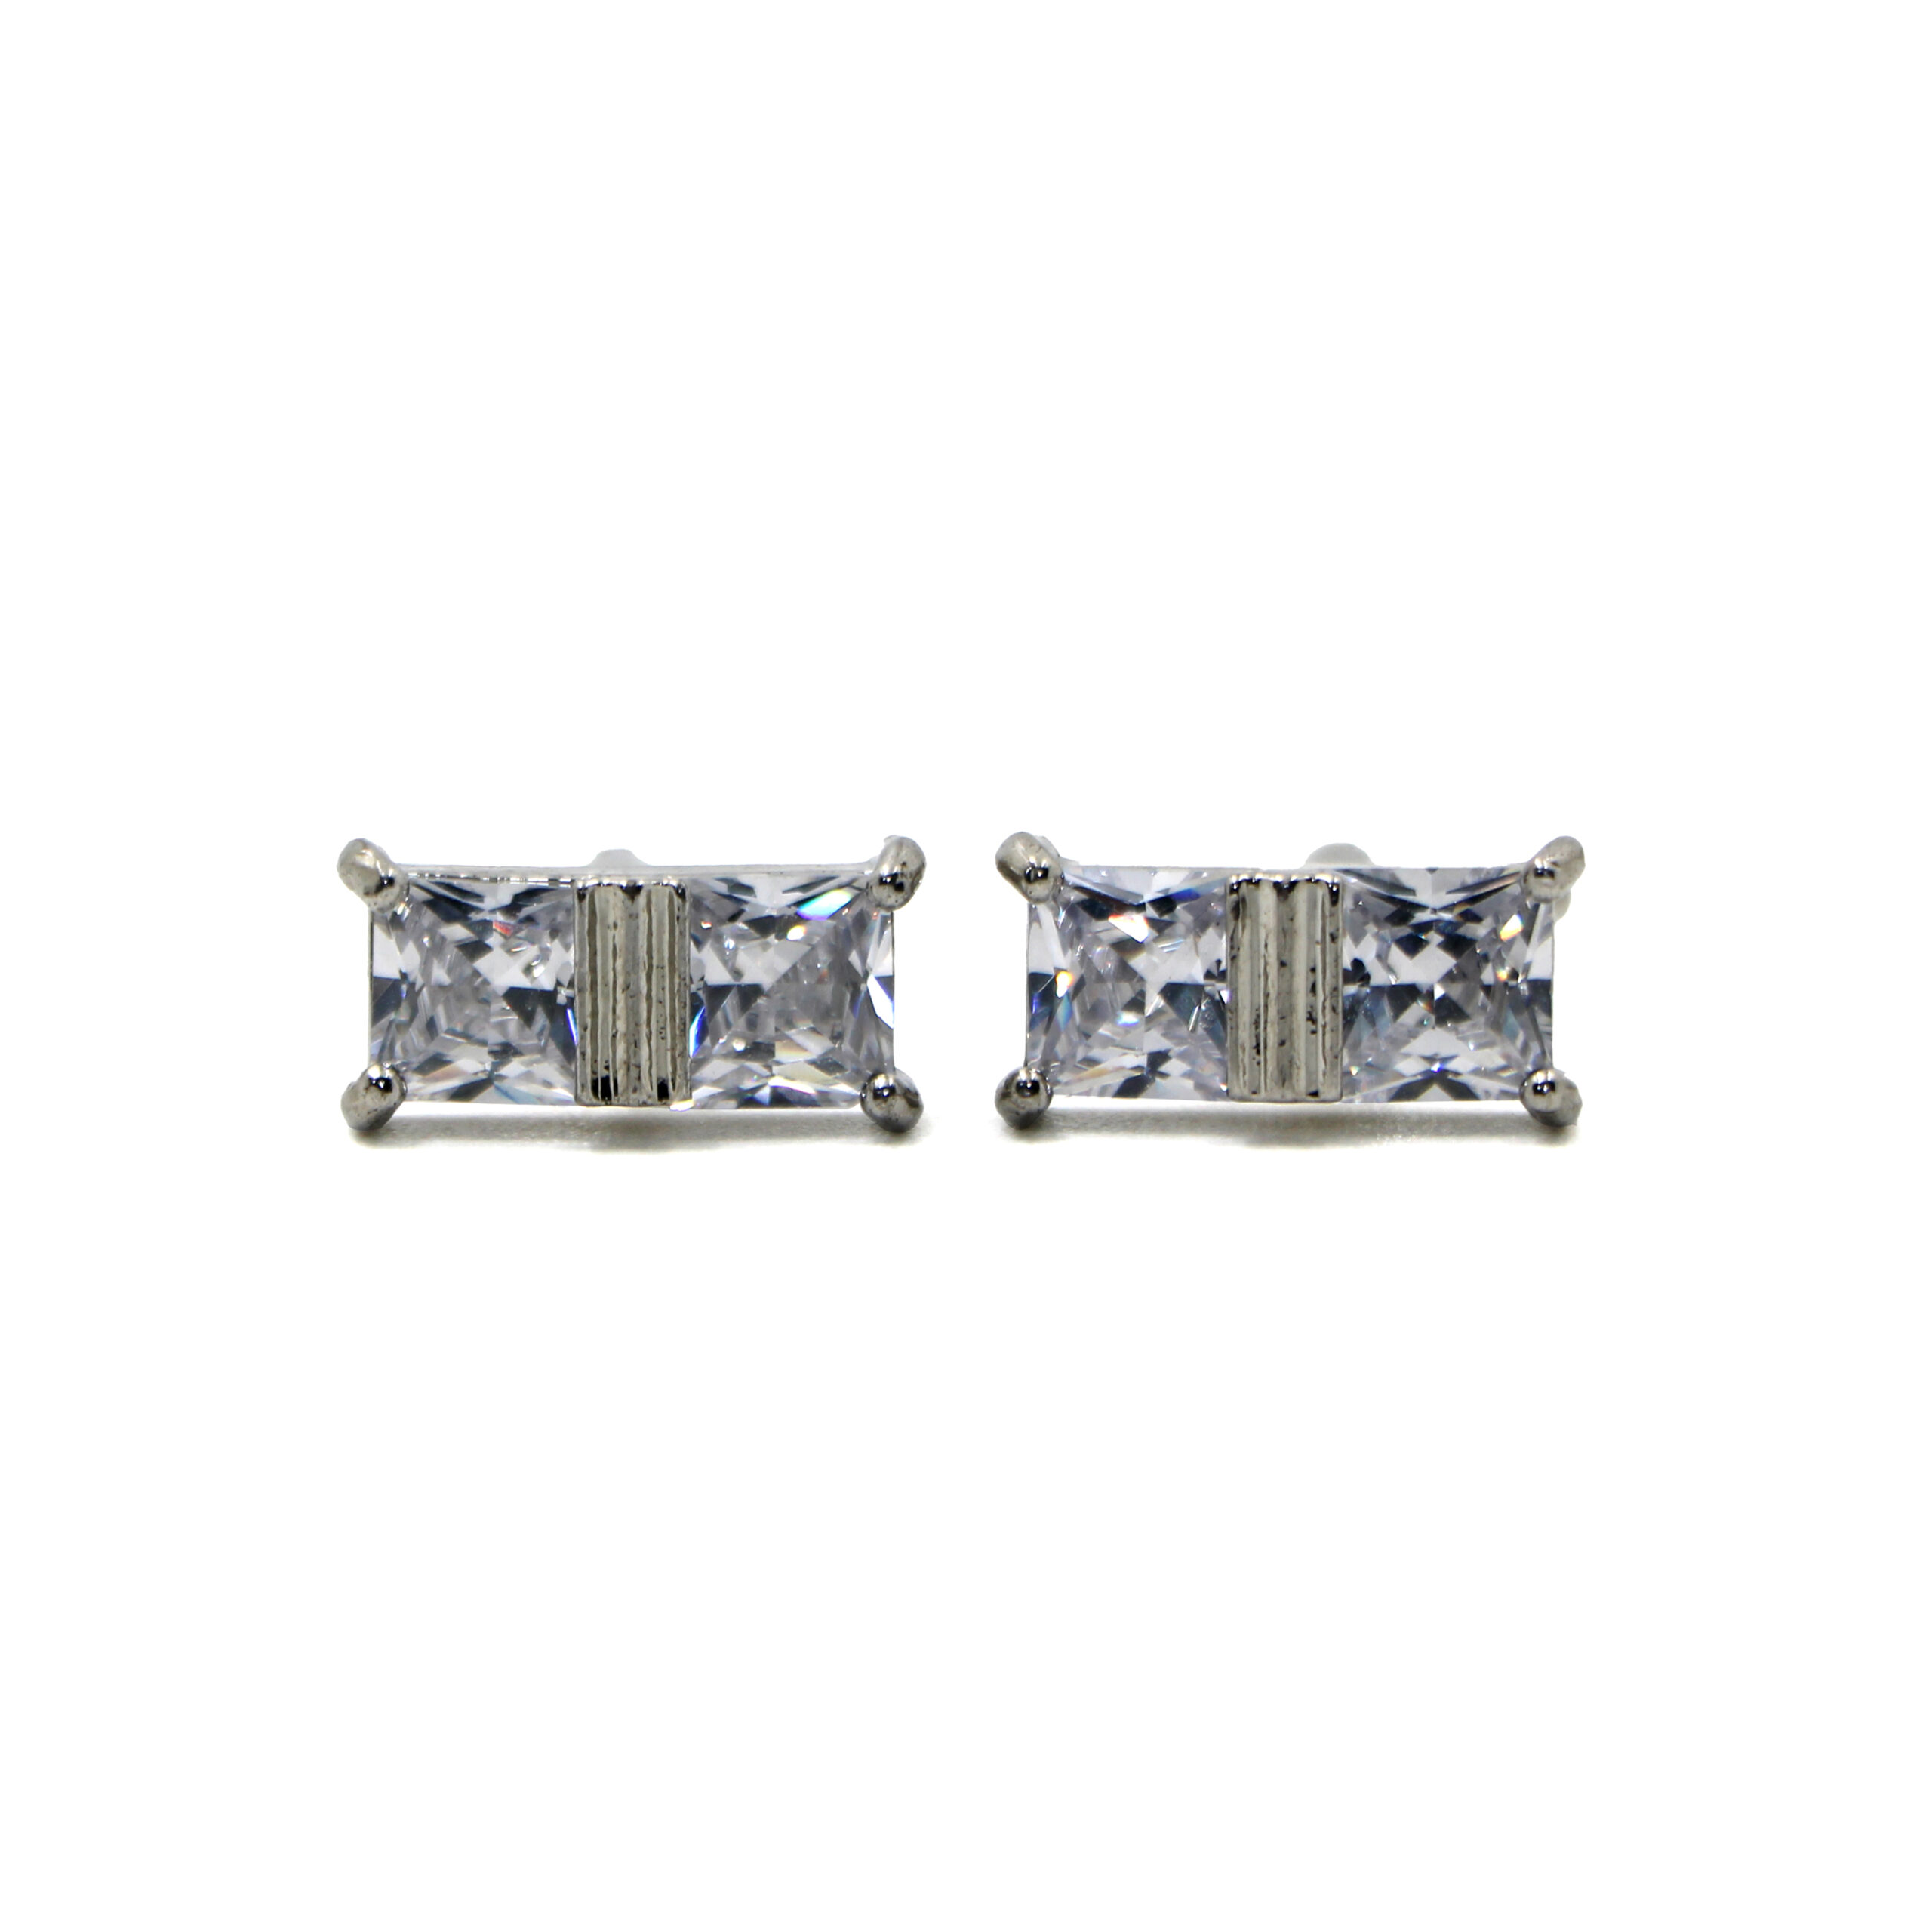 Cufflers Novelty Rectangle Crystal Cufflinks with Free Gift Box – CU-2005